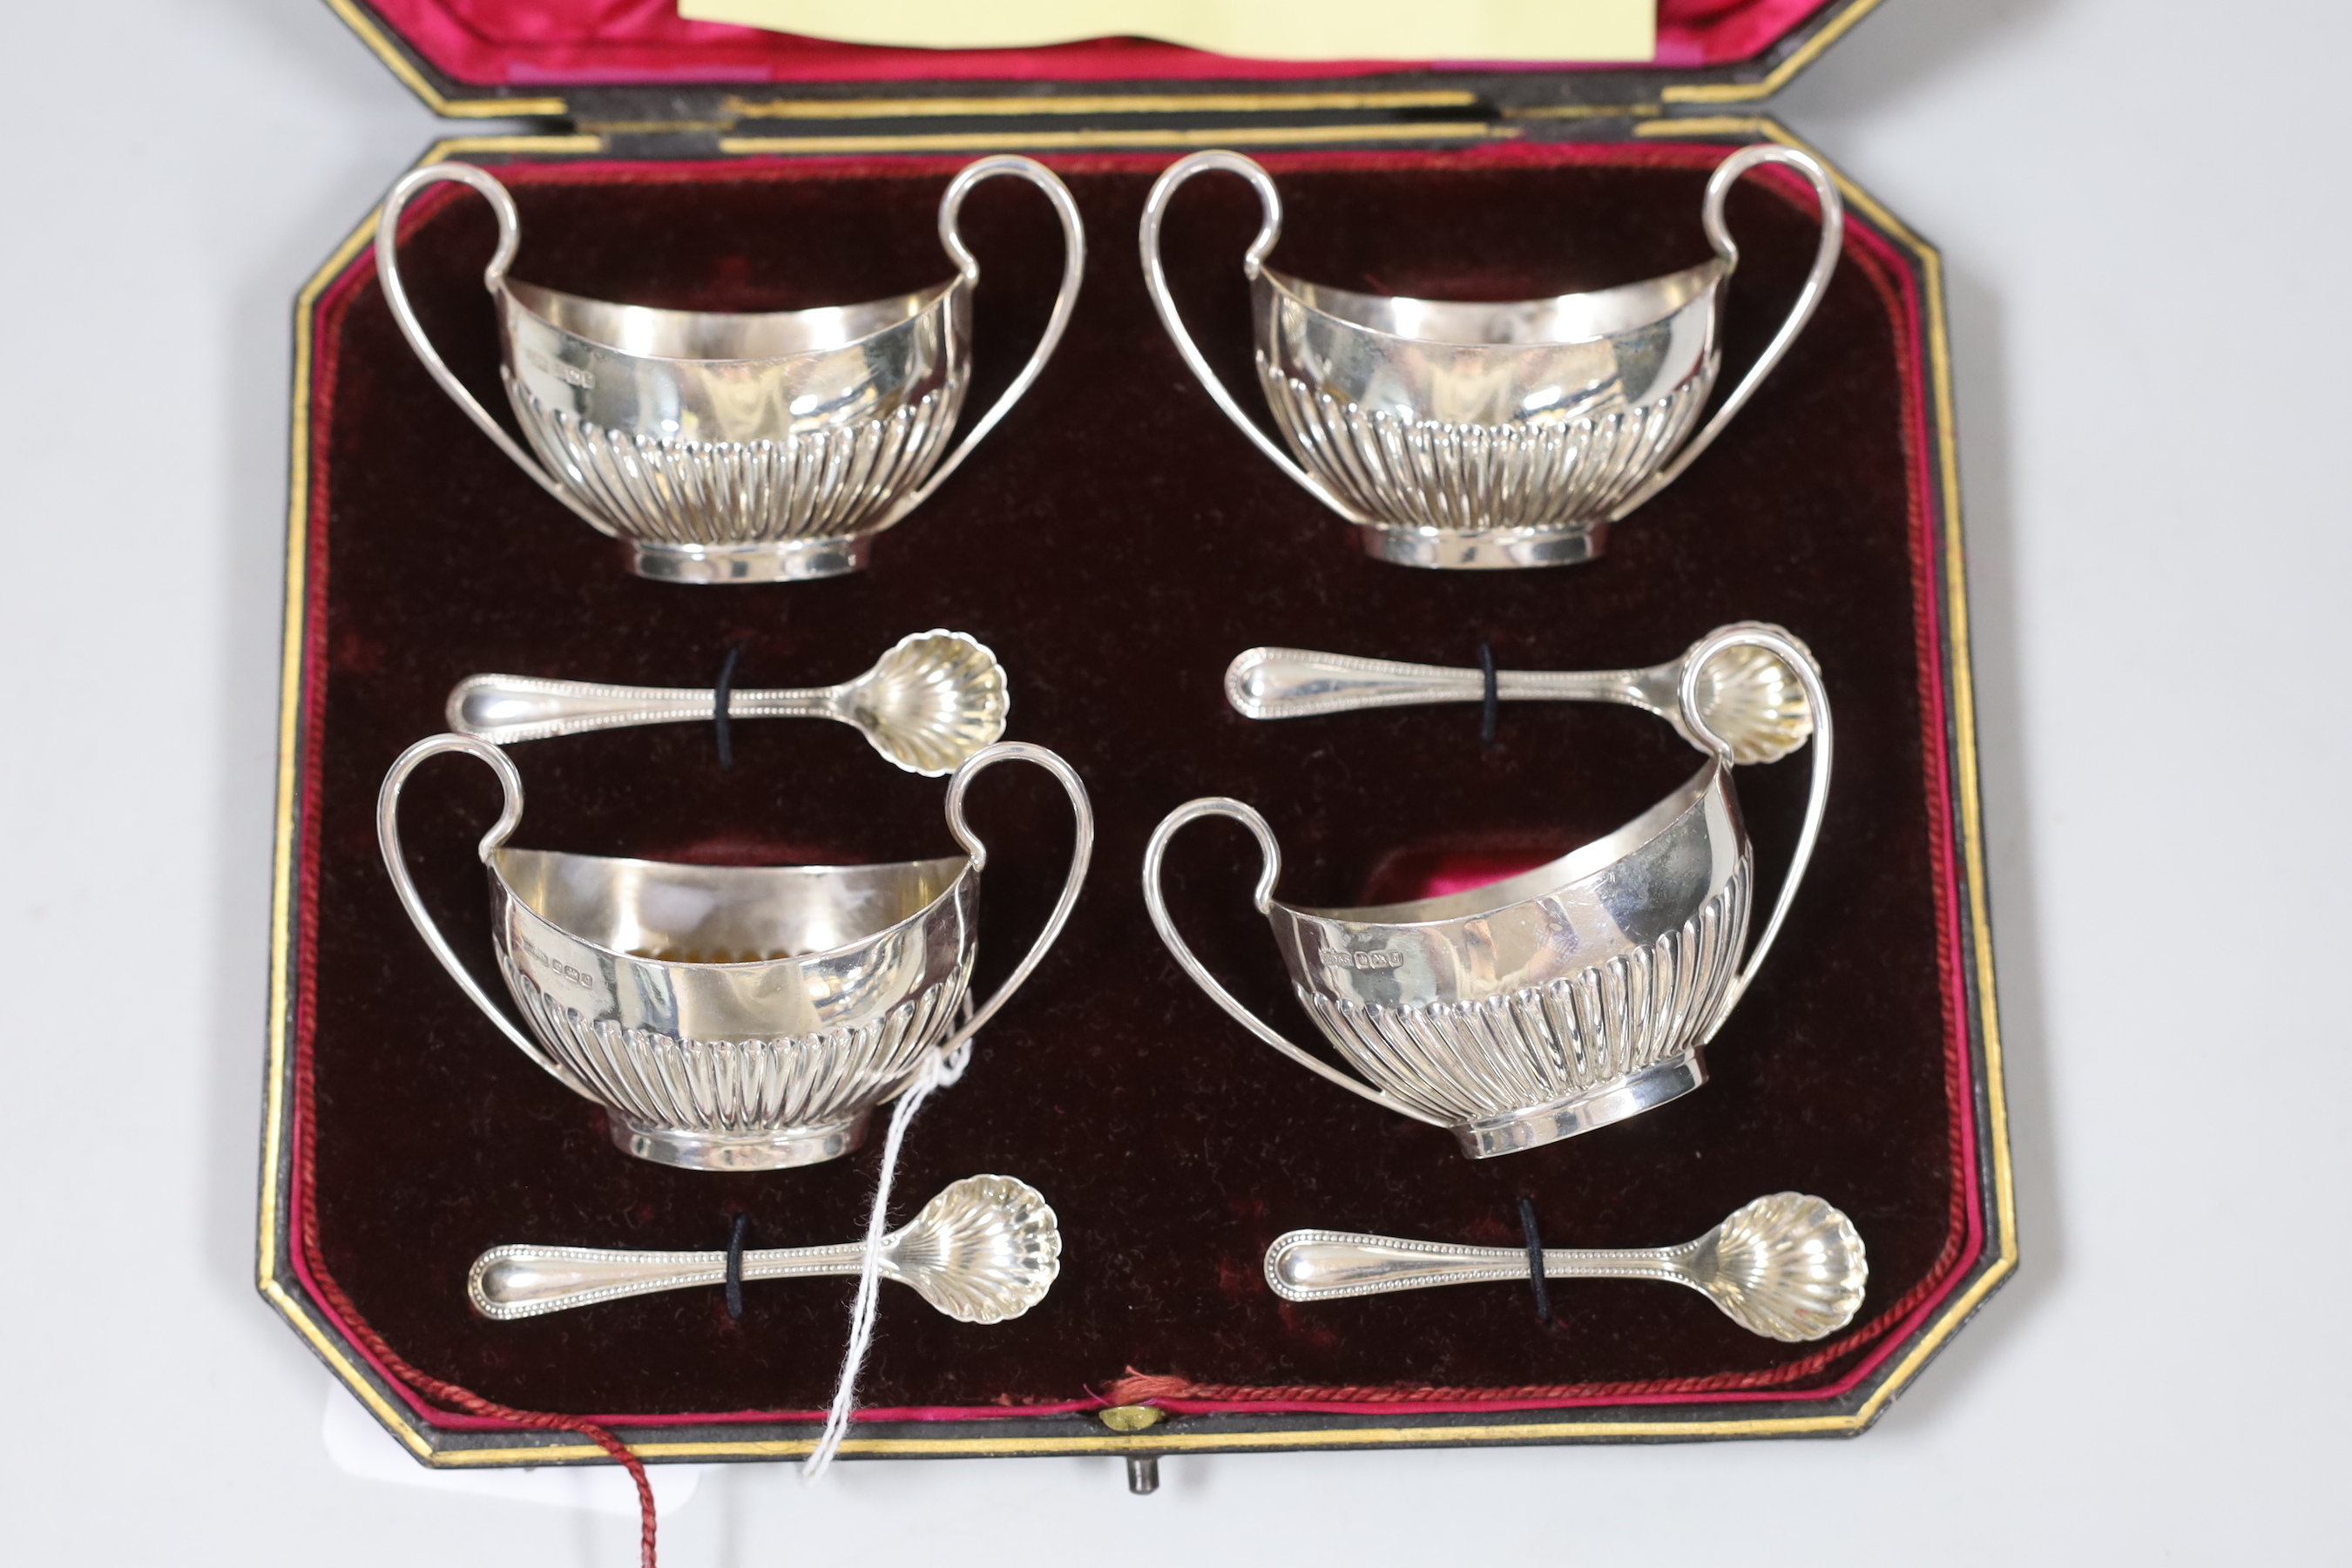 A cased set of four Edwardian demi-fluted silver two handled salts and four spoons, James Dixon & Sons, Sheffield, 1908.